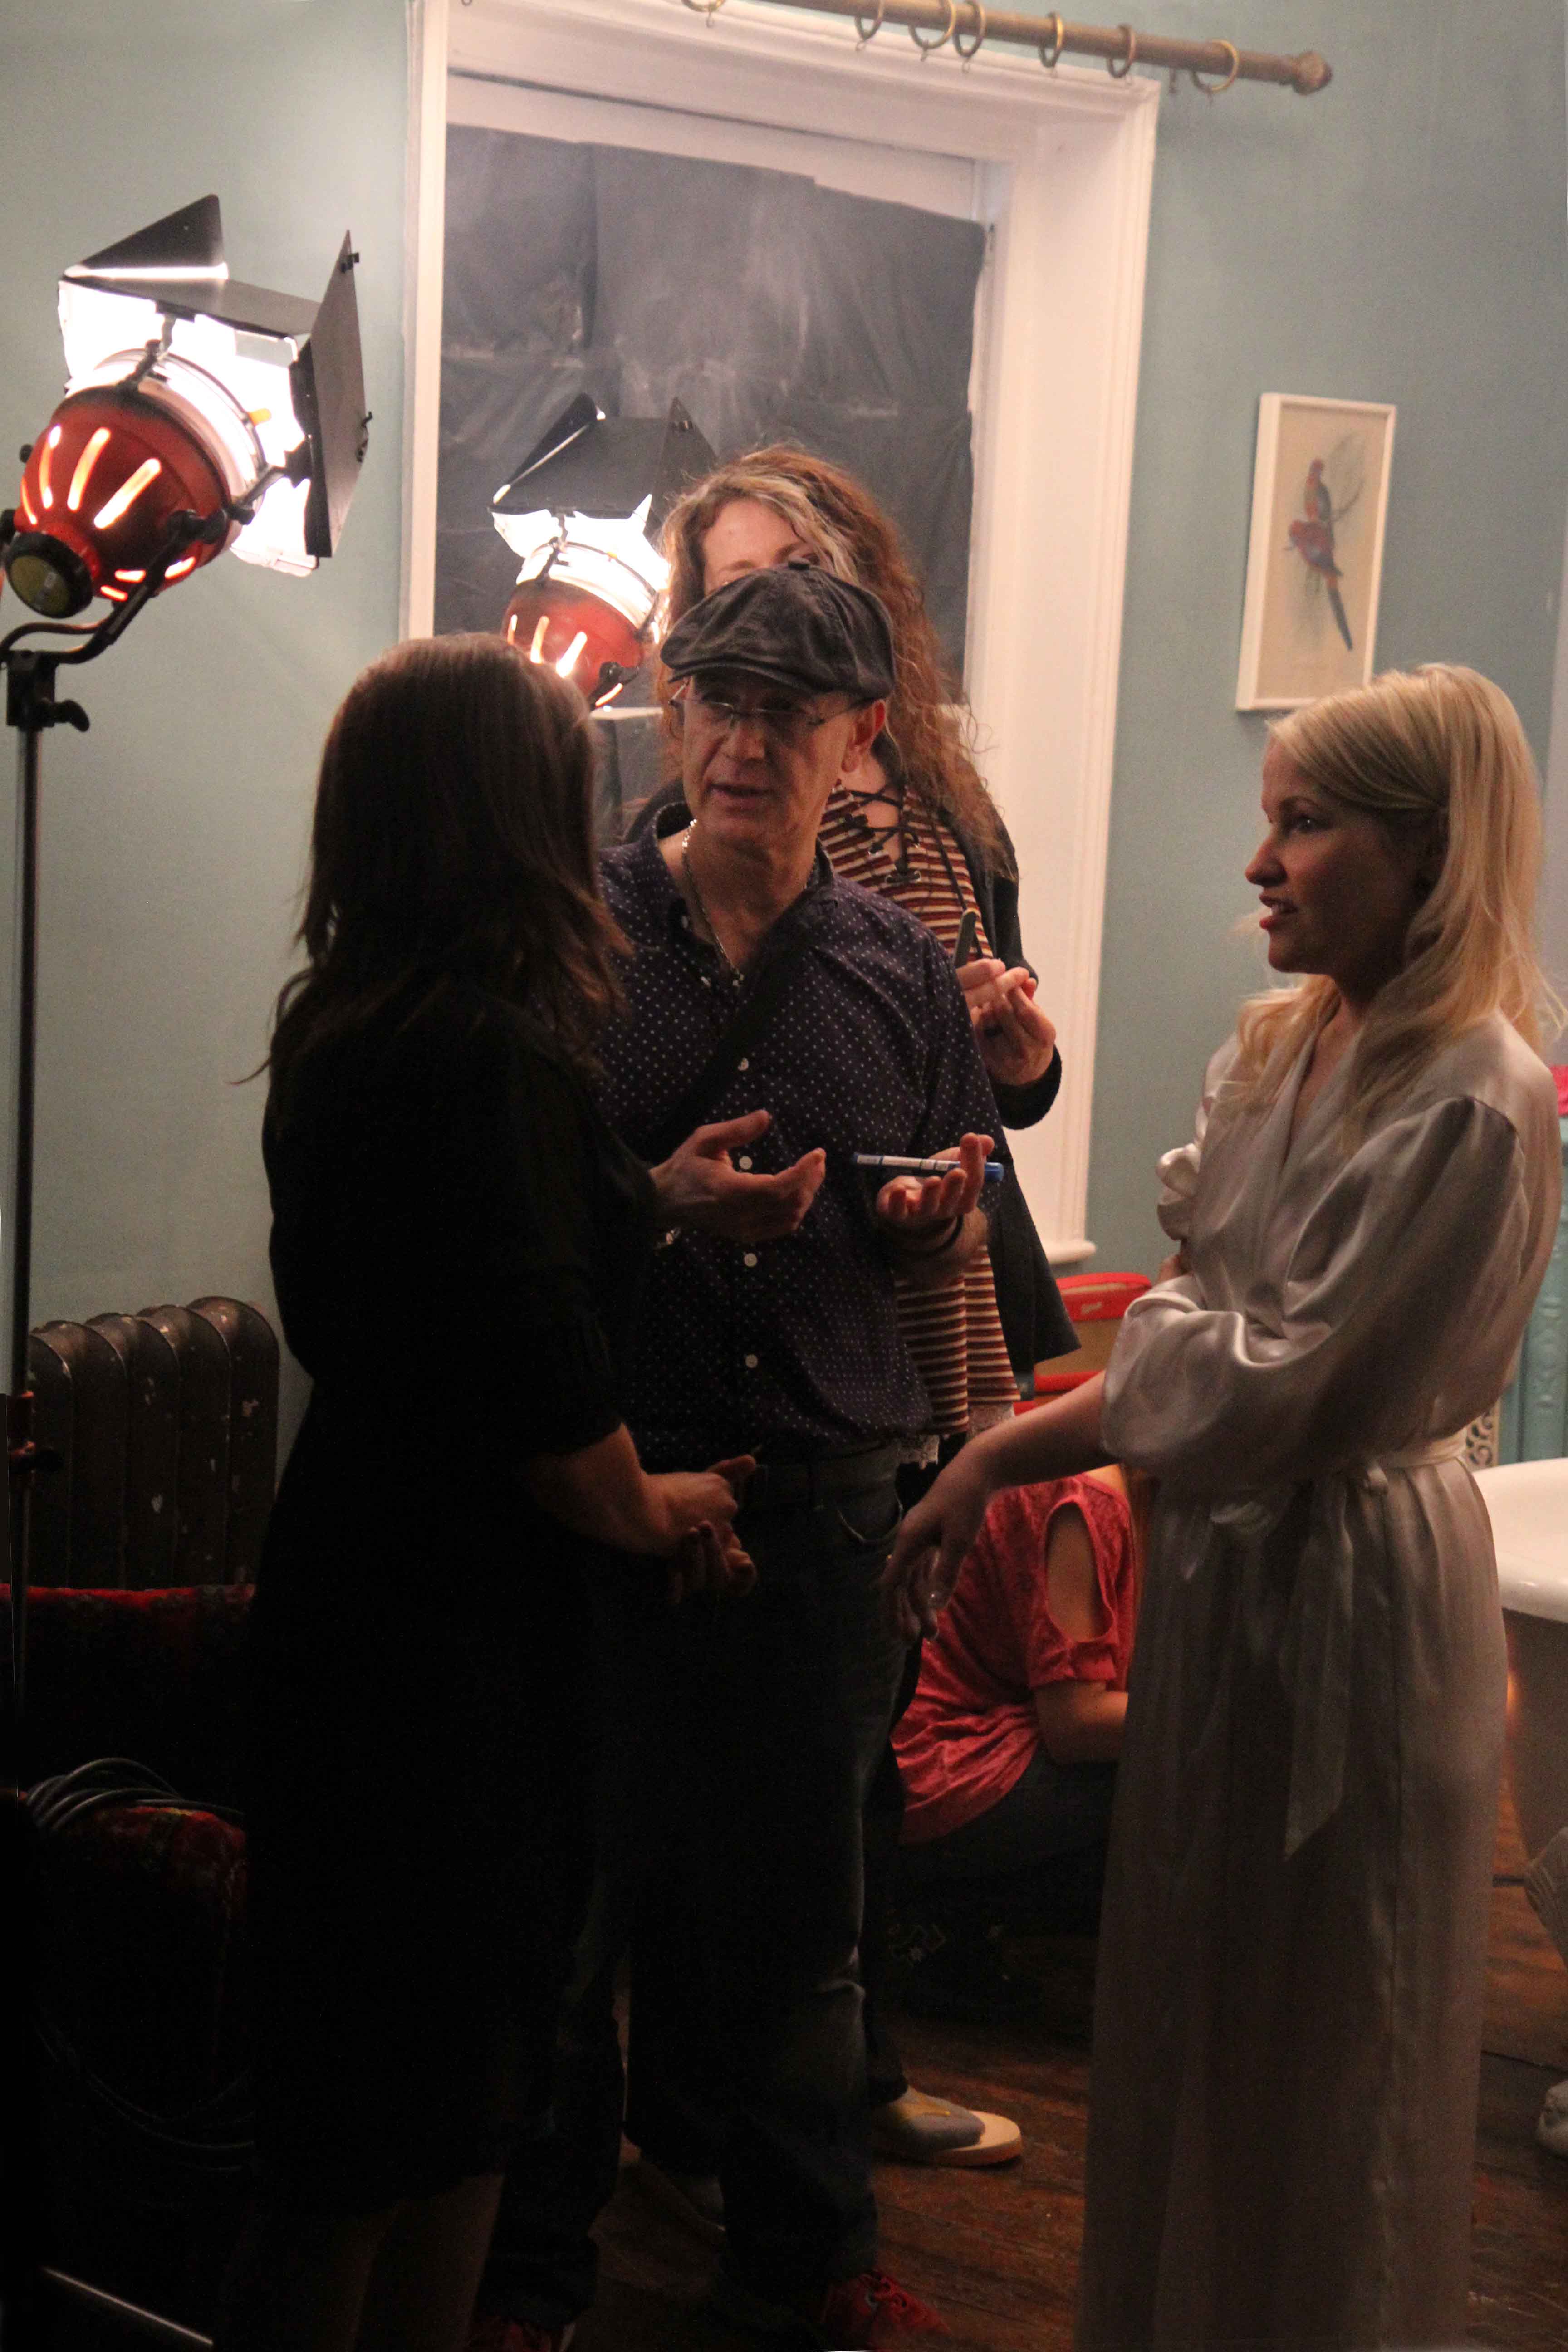 Behind the scenes of Salome. Kevin talking to Kat and Anna.